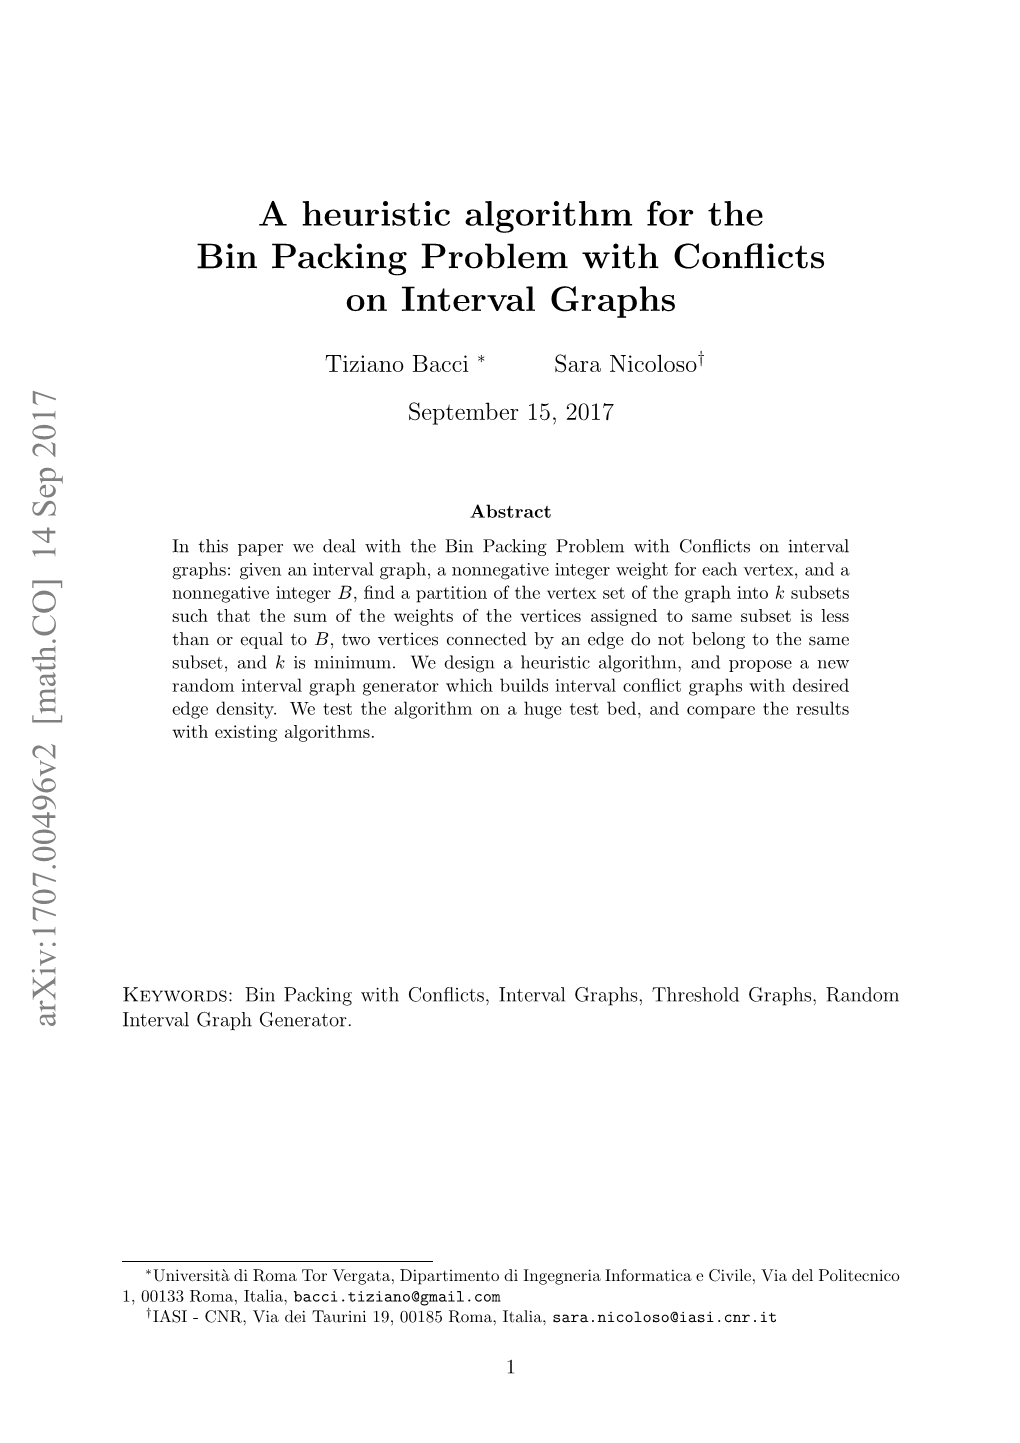 A Heuristic Algorithm for the Bin Packing Problem with Conflicts On